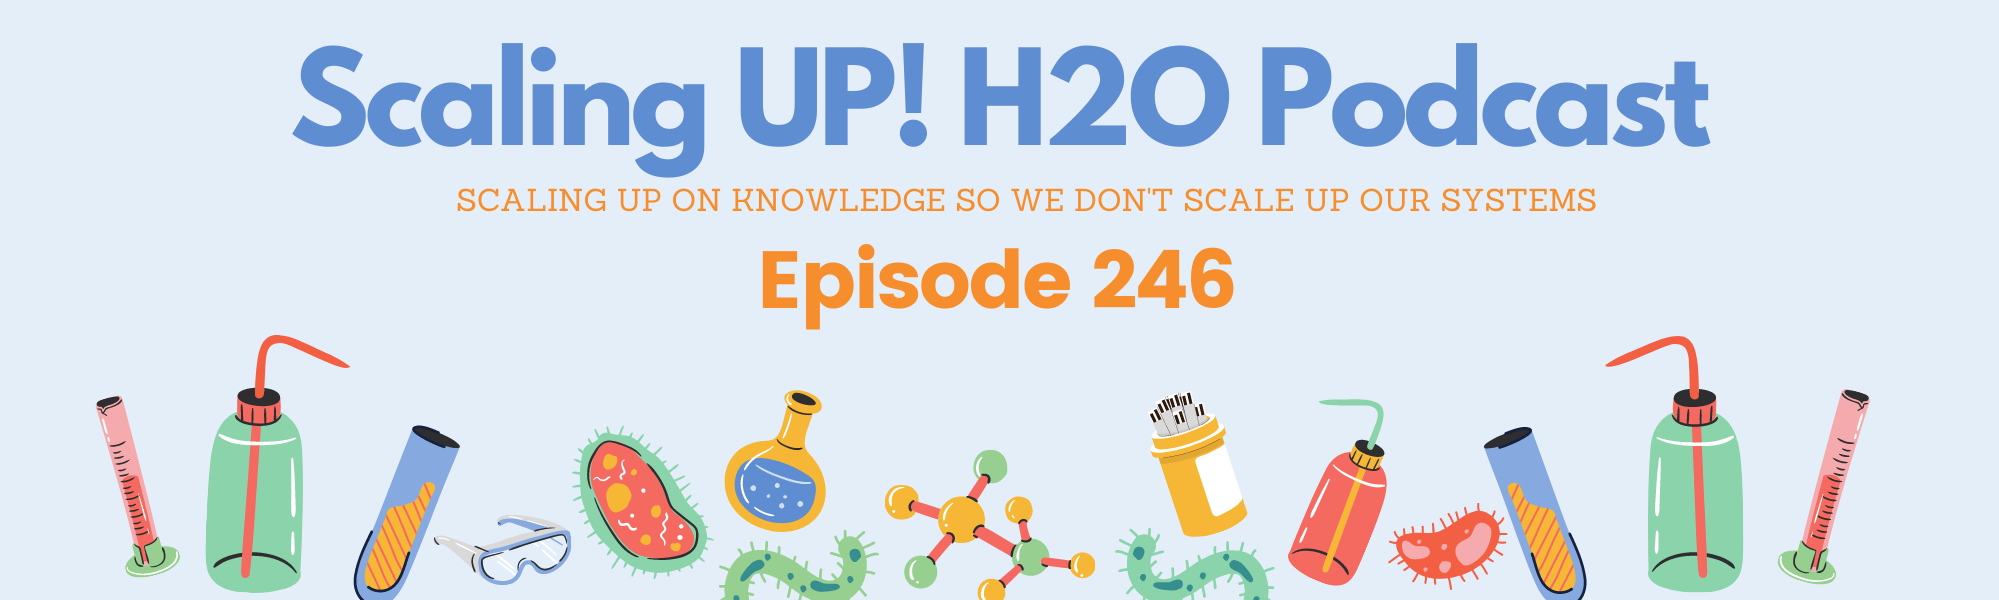 246 The One About How To Patent New Water Treatment Technologies - Scaling UP! H2O